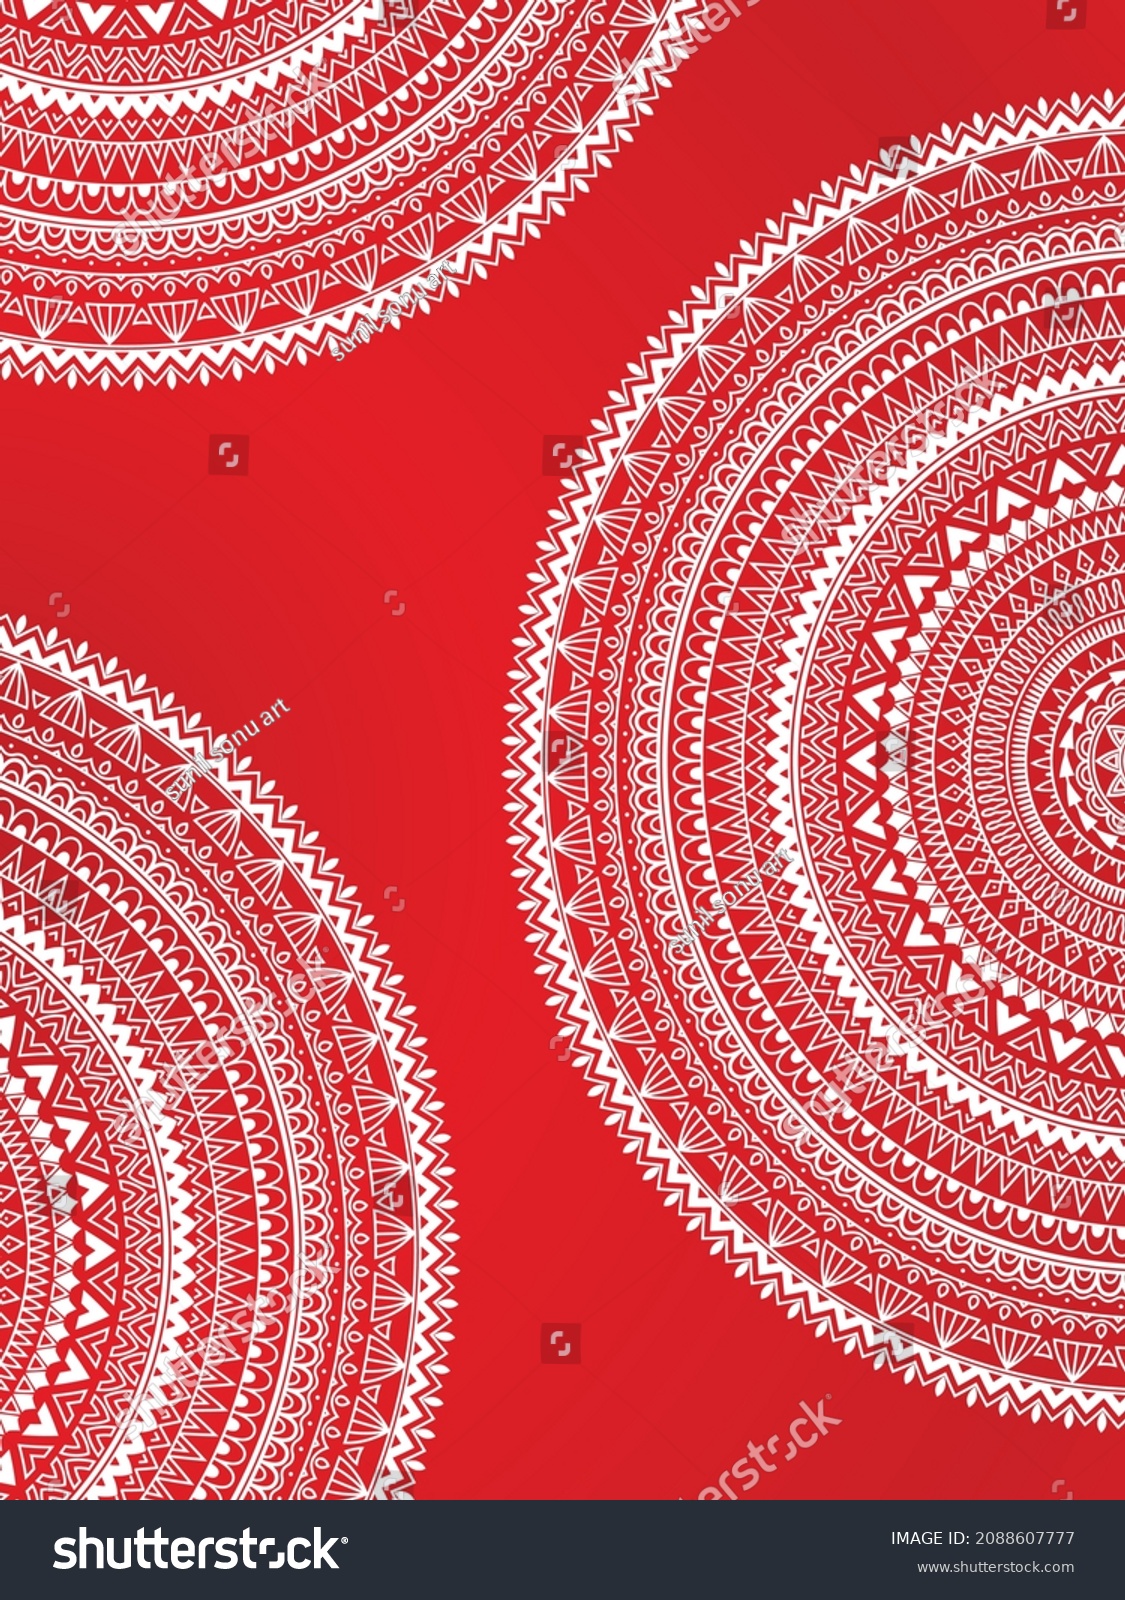 SVG of Aipan Design pattern for india festival vector red and white color
 svg